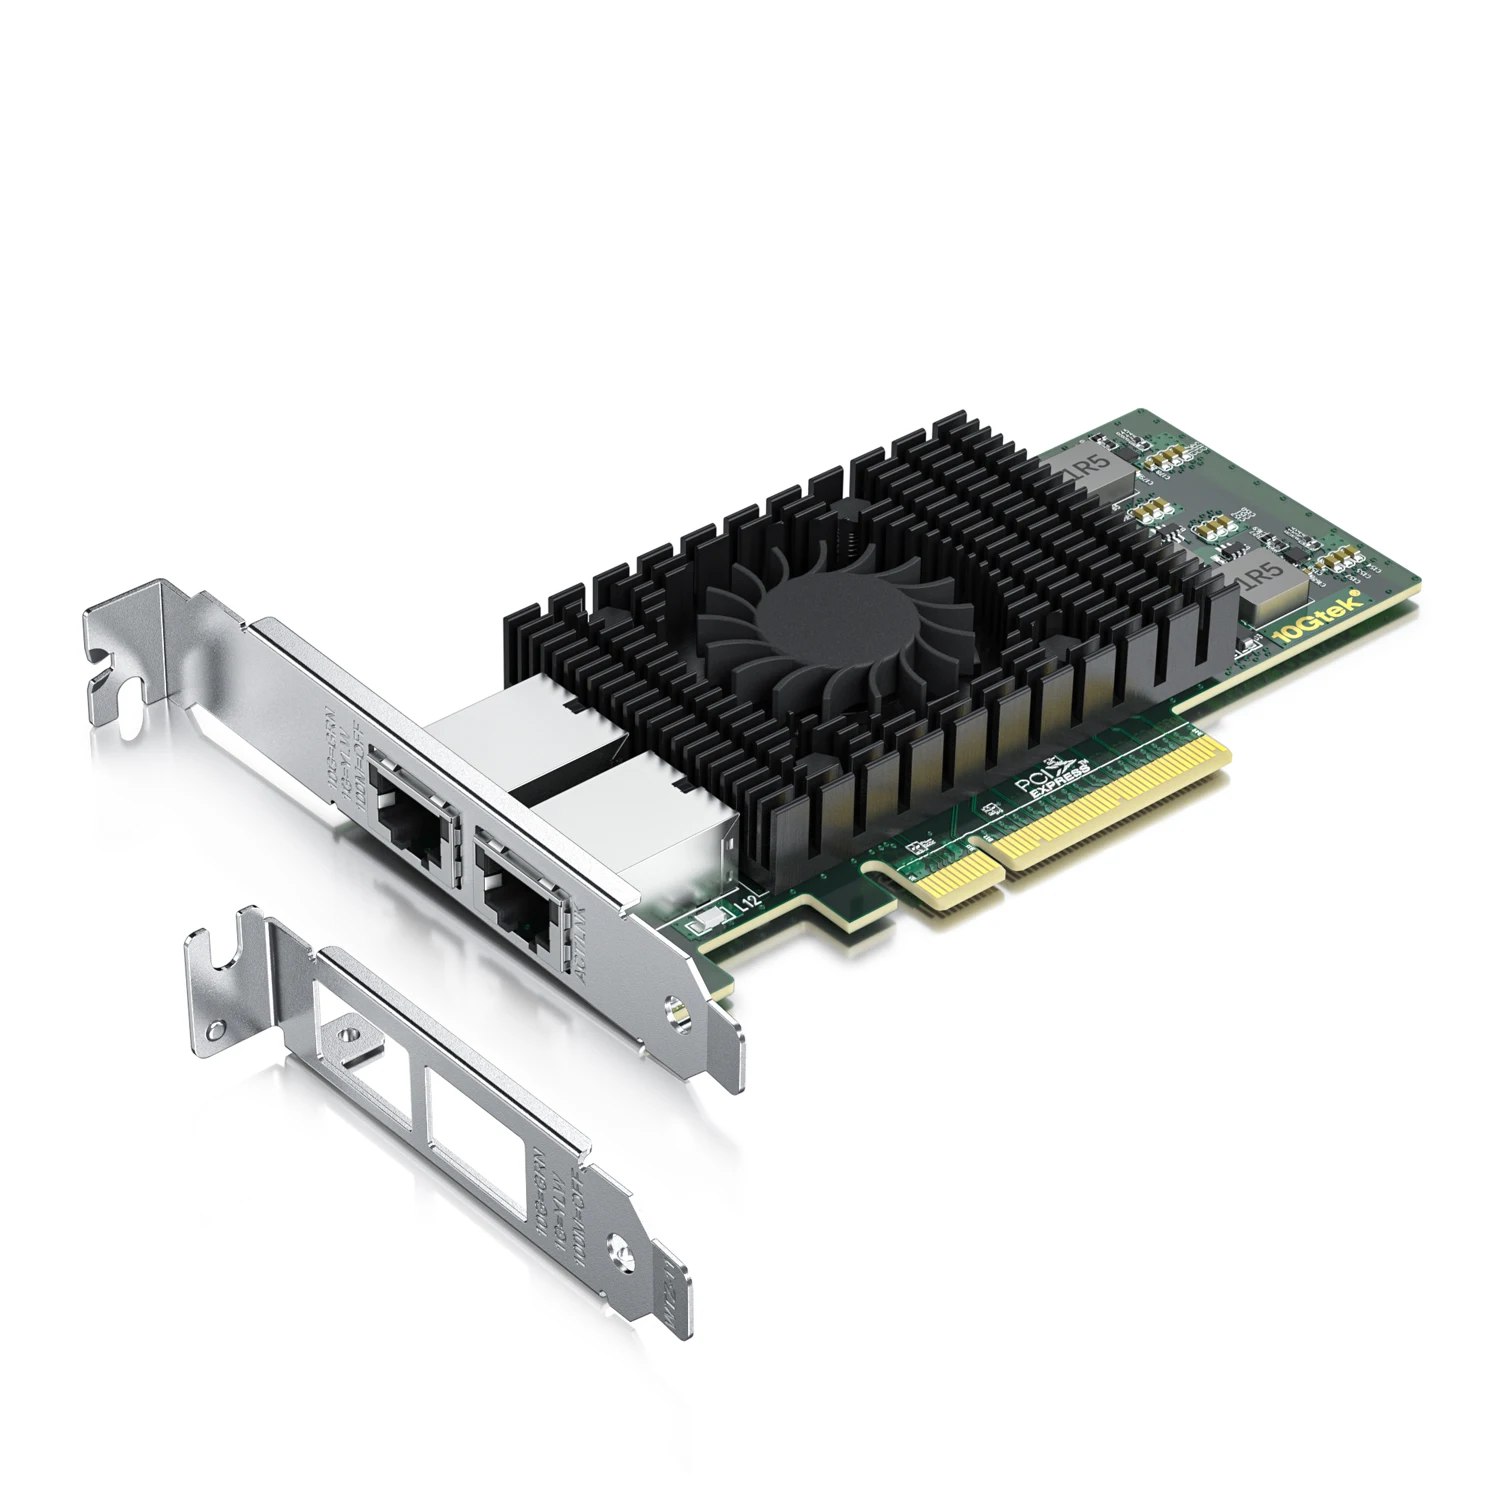 10Gb PCI-E NIC Network Card, PCI Express Ethernet LAN Adapter Support Windows Server/Windows/Linux/ESX, Compare to Intel X540-T2 compare